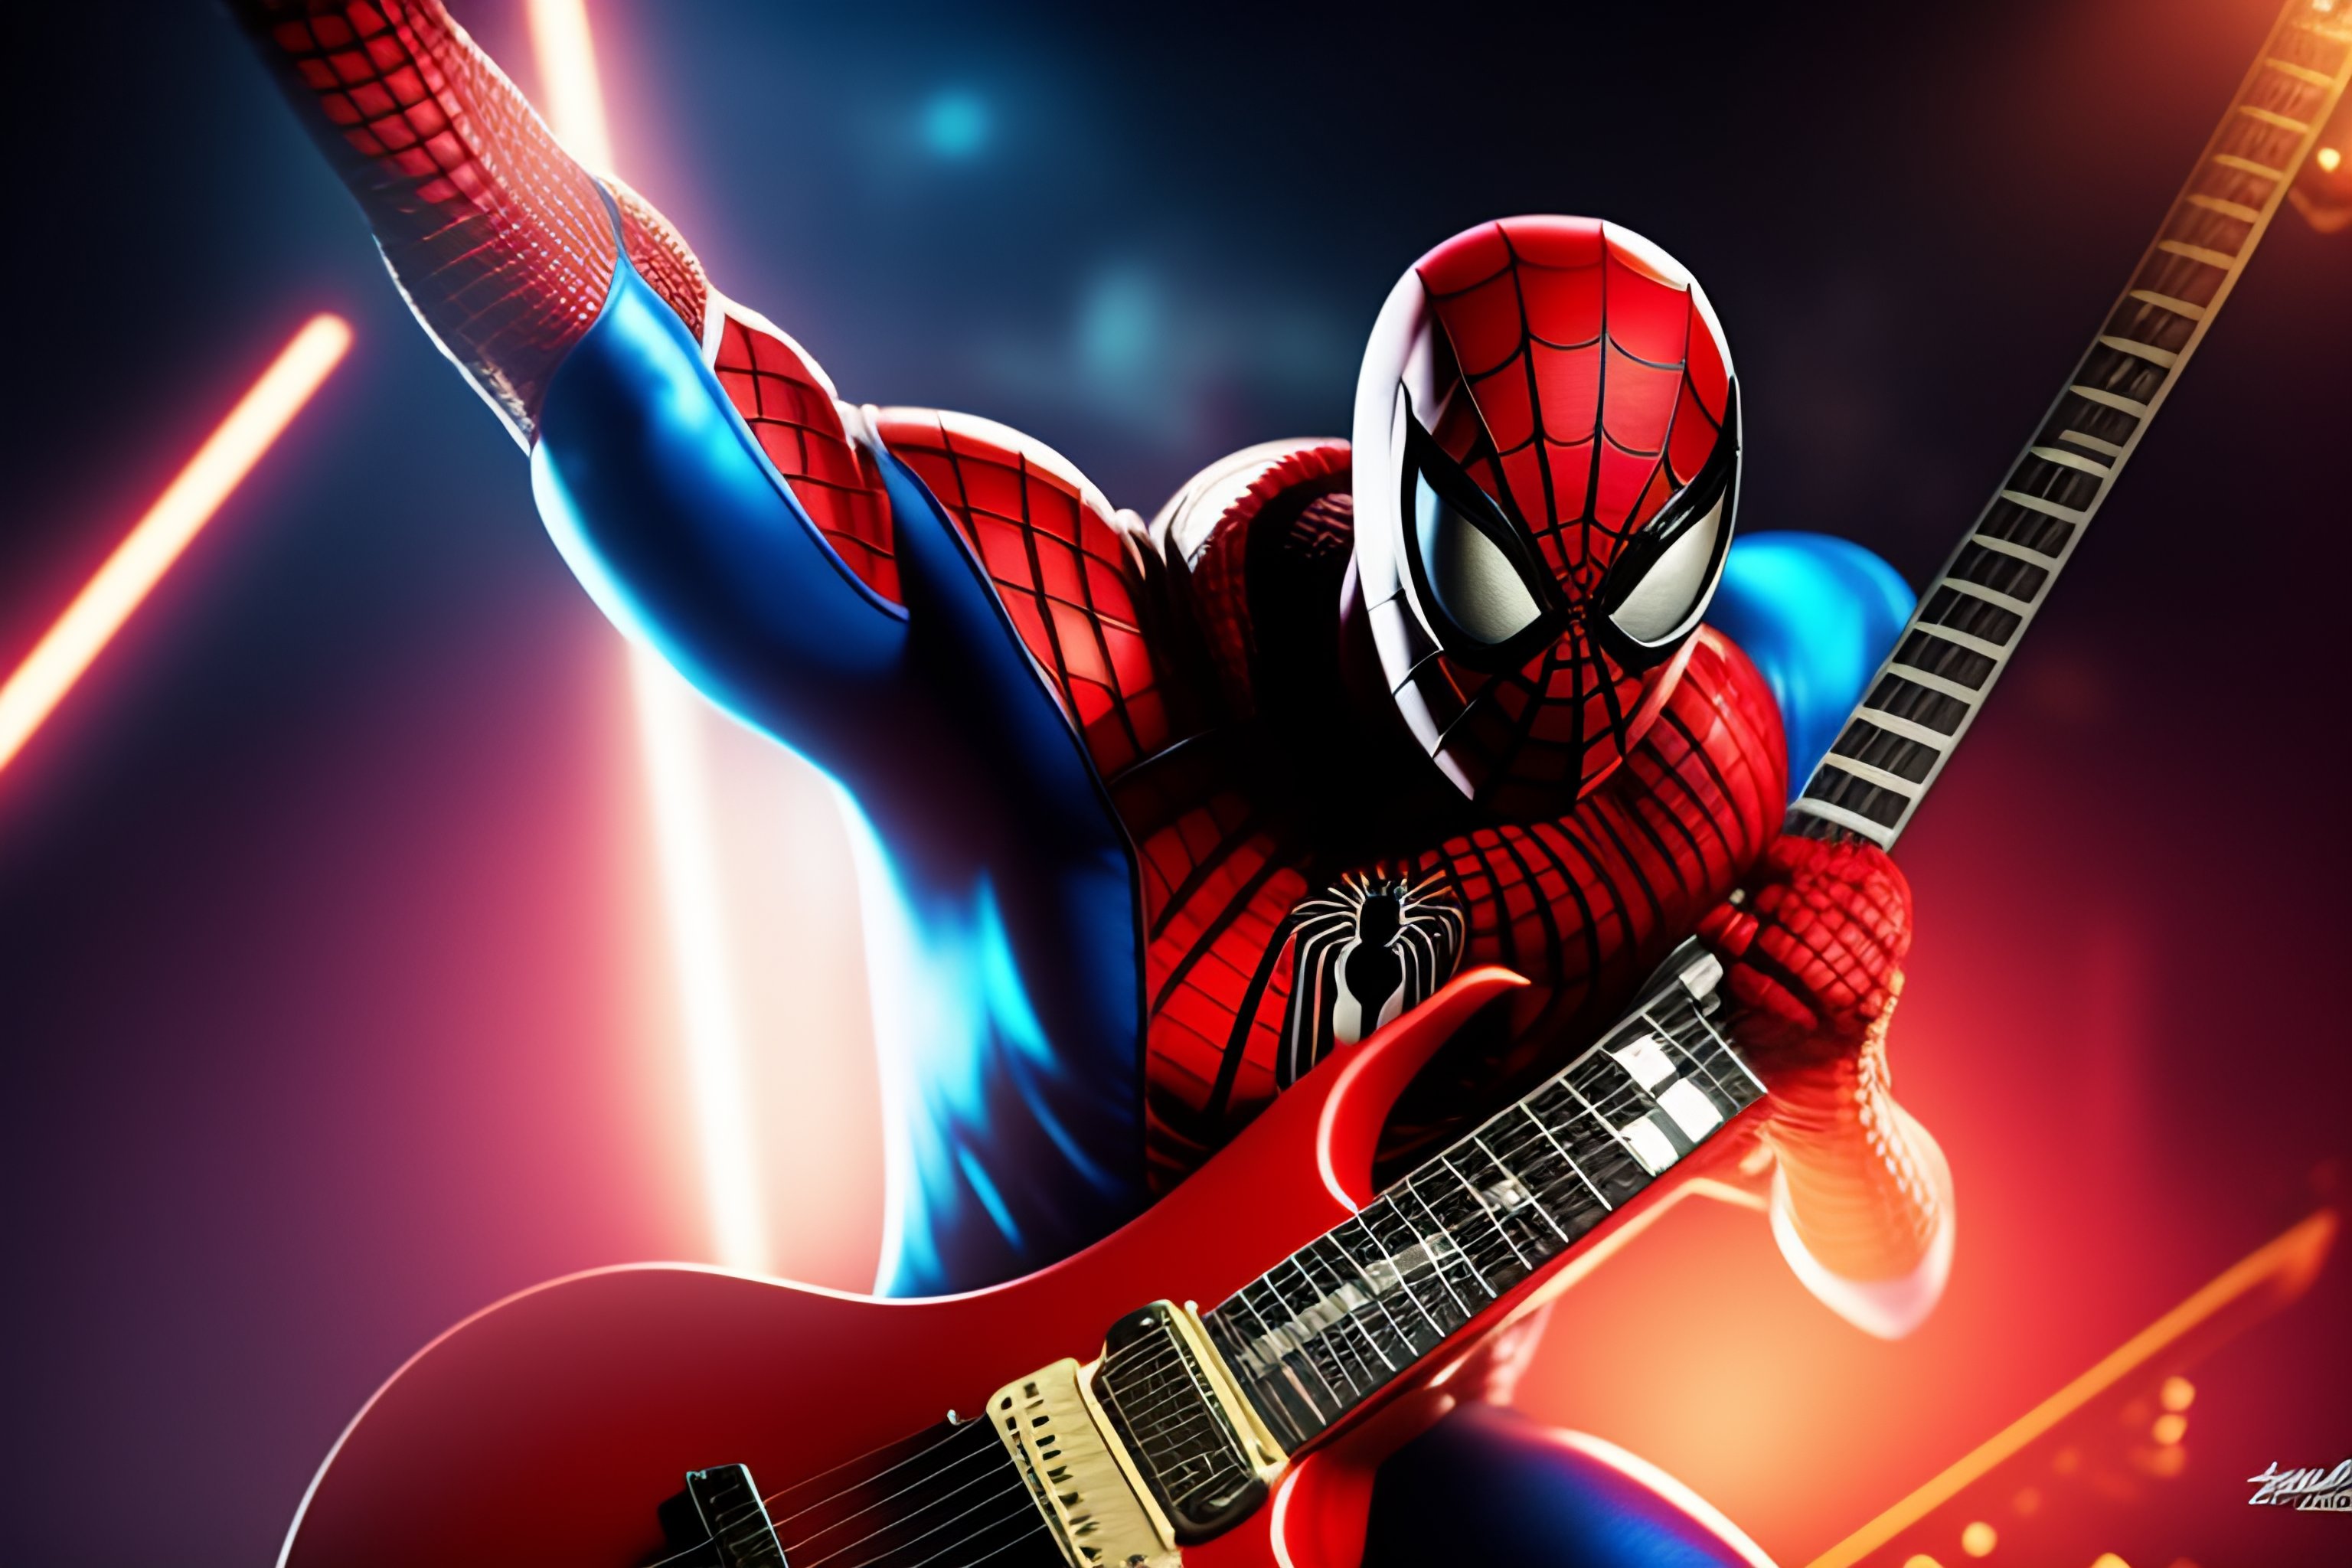 Lexica - Spiderman playing guitar in a show